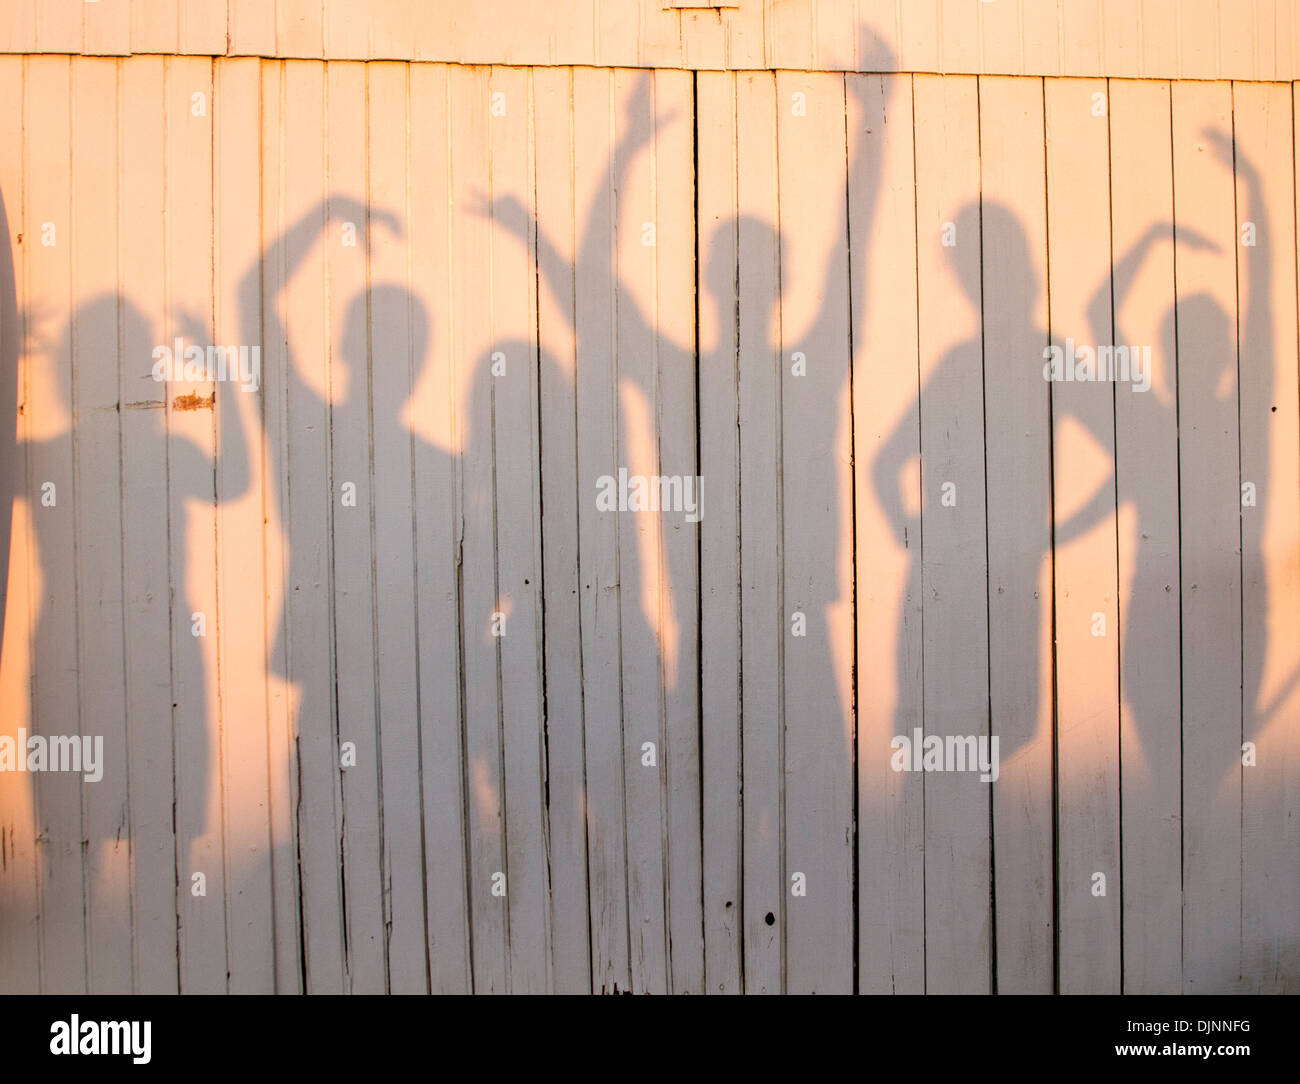 View of a fun photo of a group of friends making poses creating a shadow on a wooden wall. Stock Photo